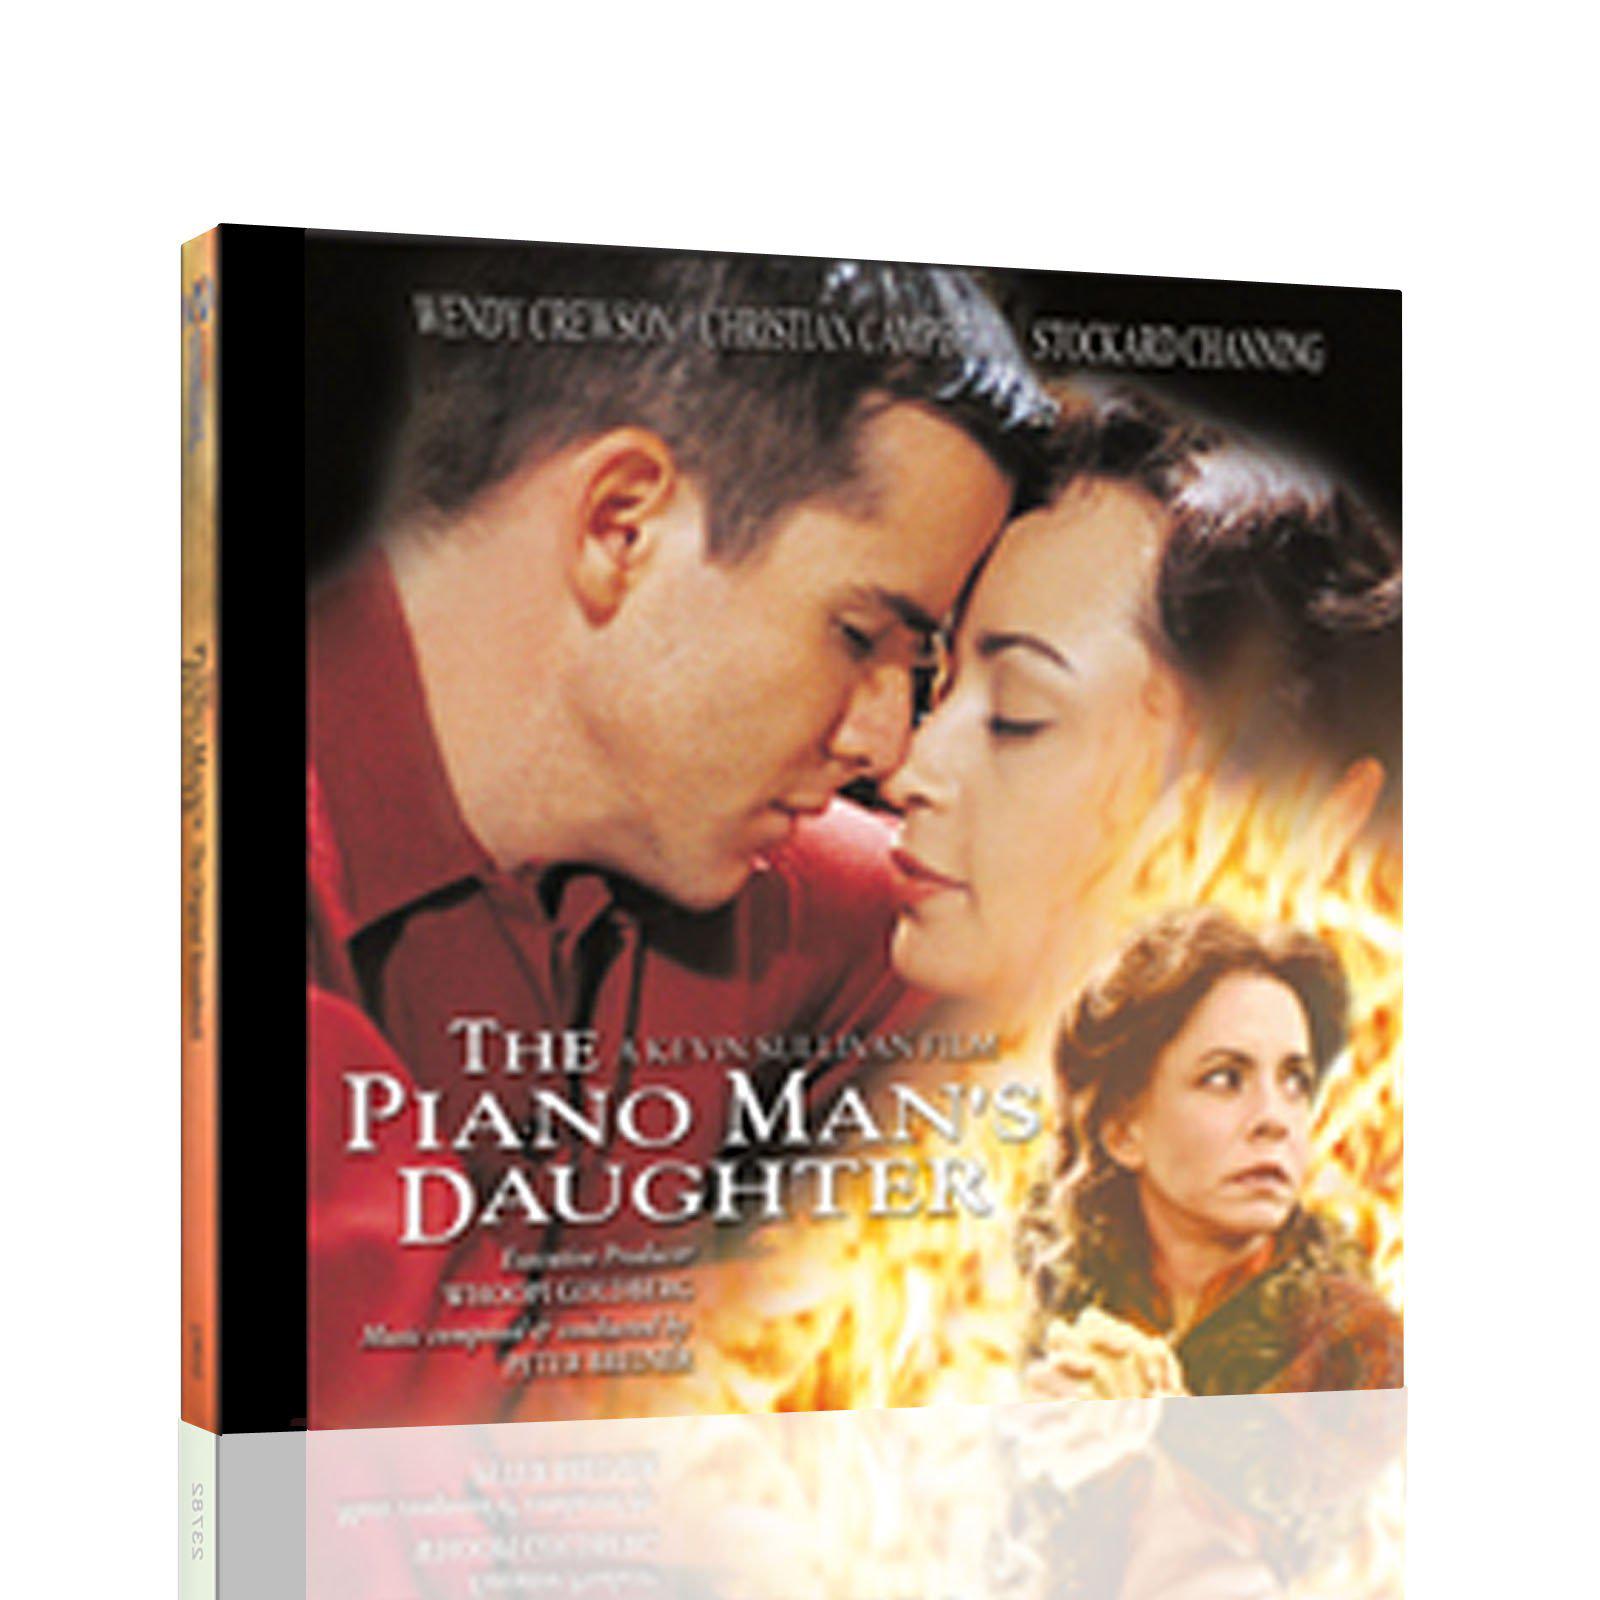 The Piano Man's Daughter Soundtrack CD